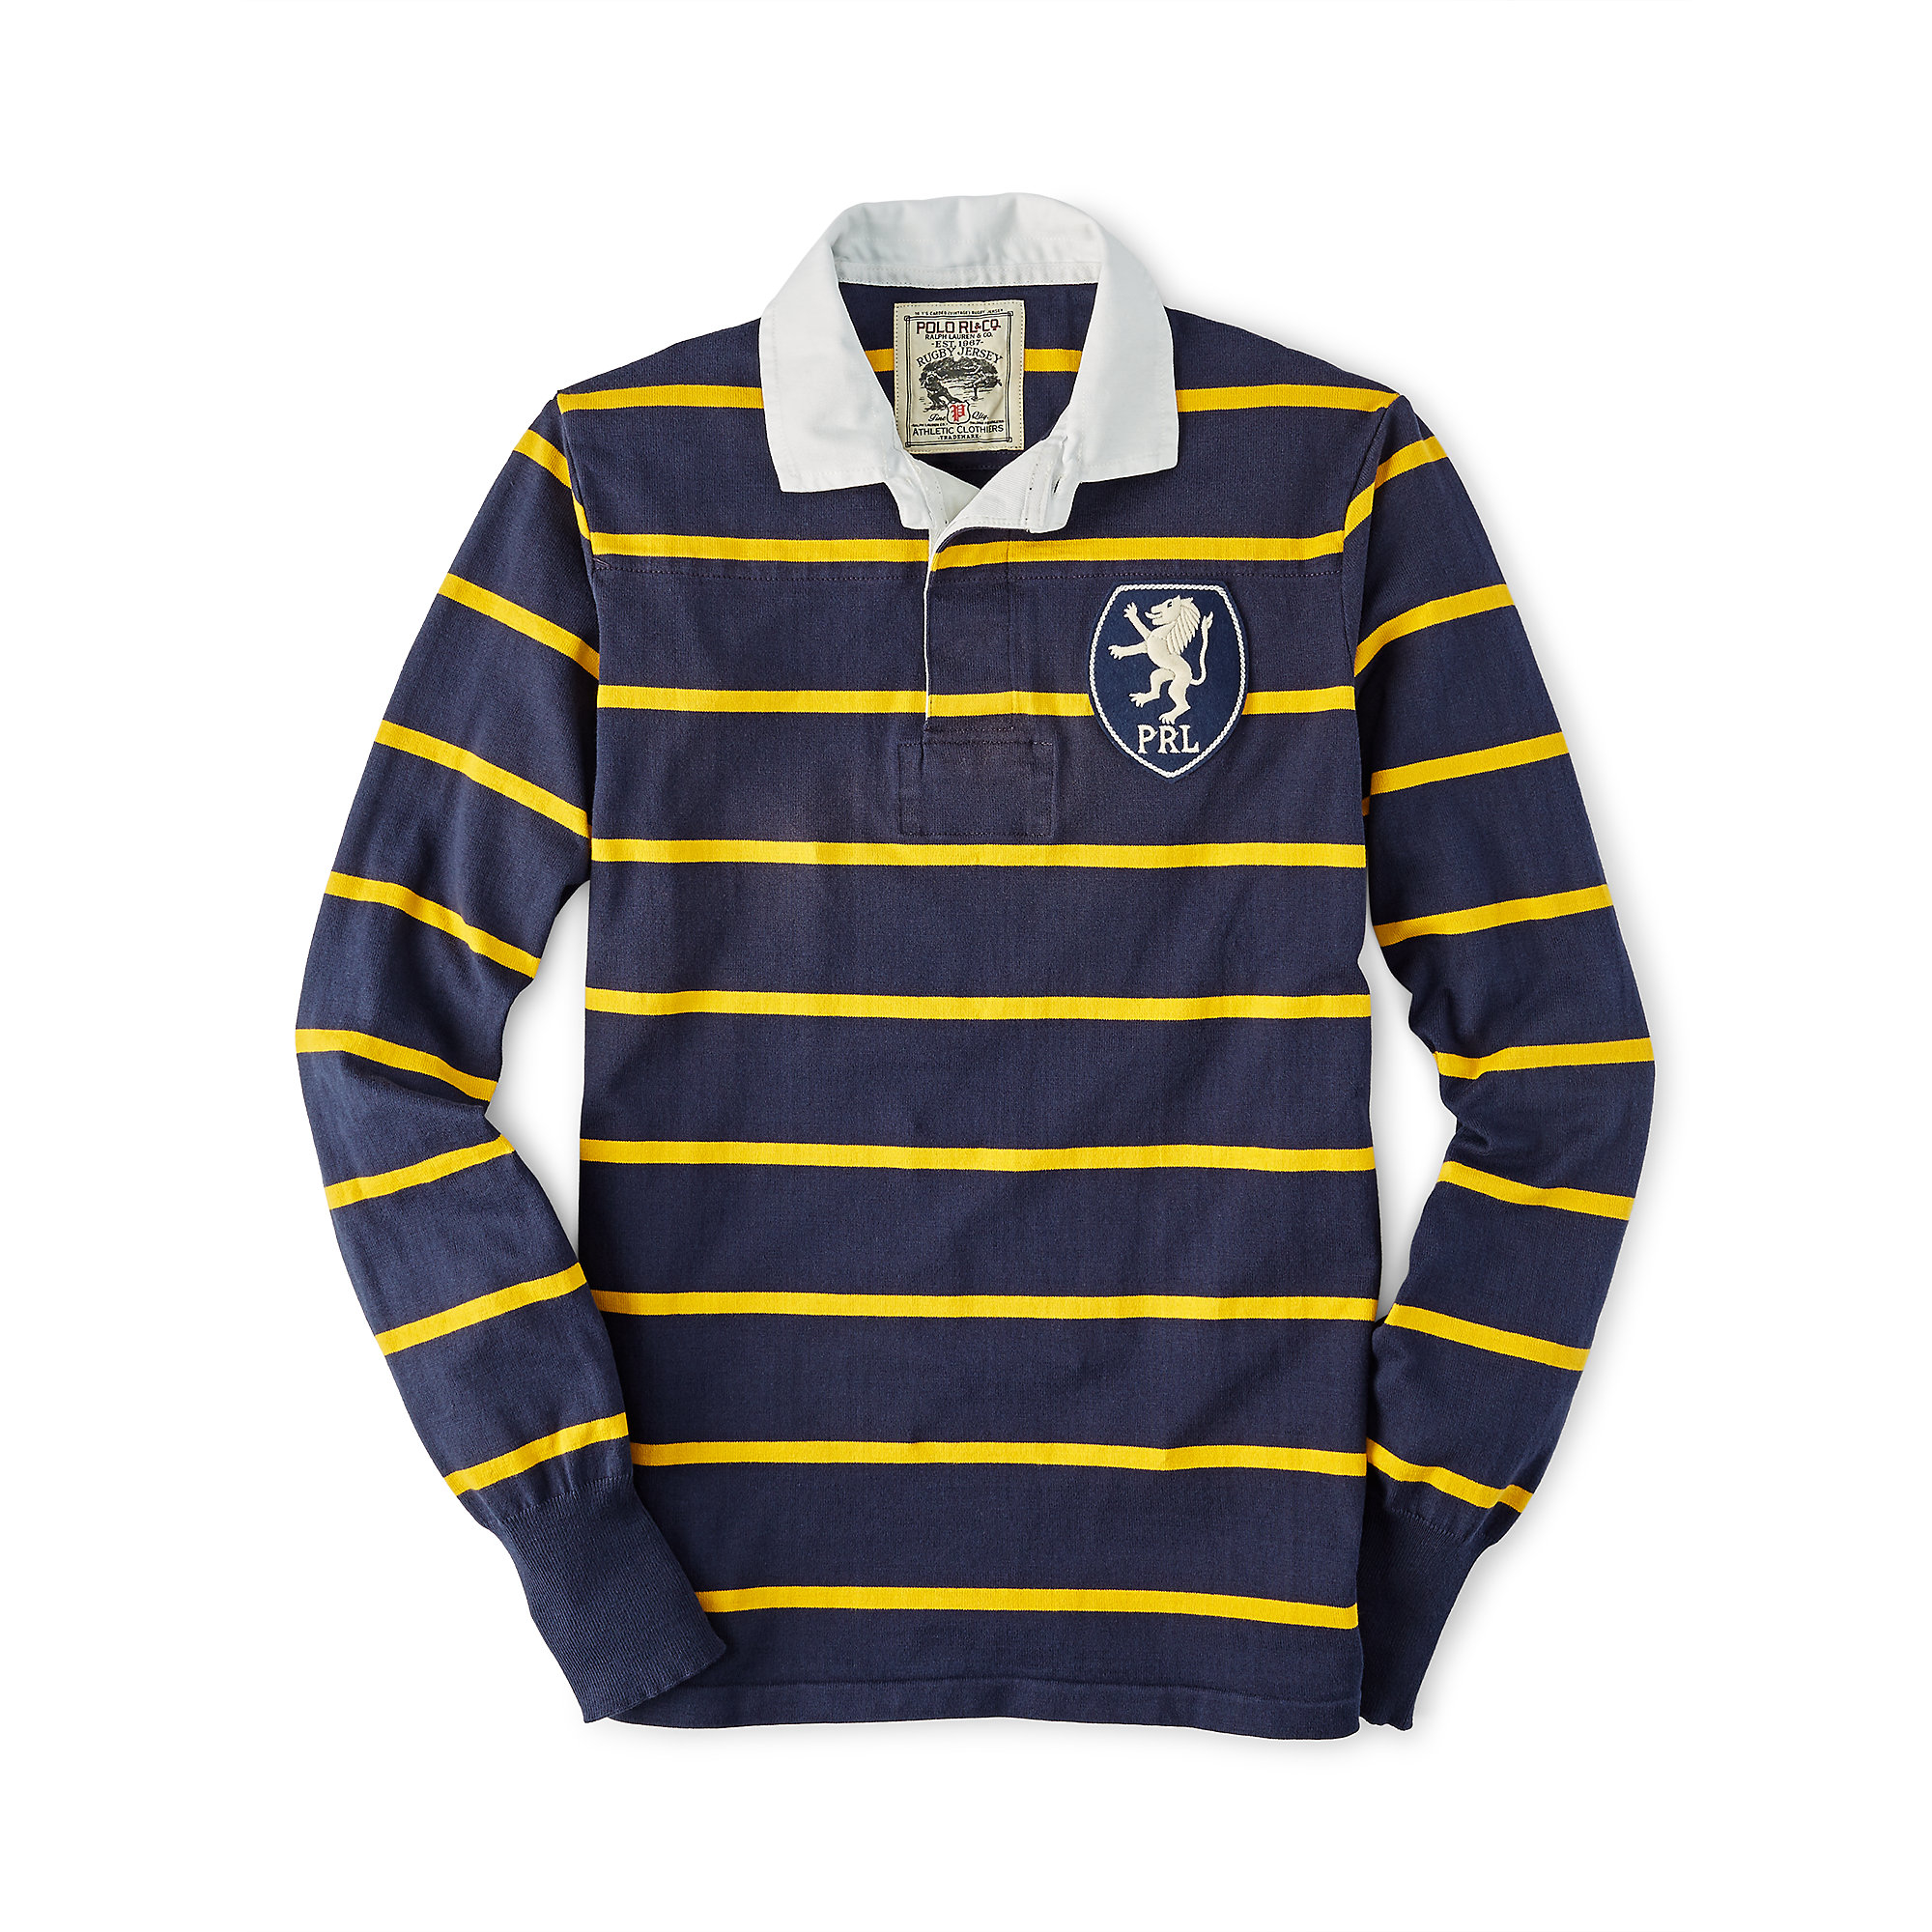 Lyst - Polo Ralph Lauren Custom-fit Striped Rugby Shirt in Yellow for Men